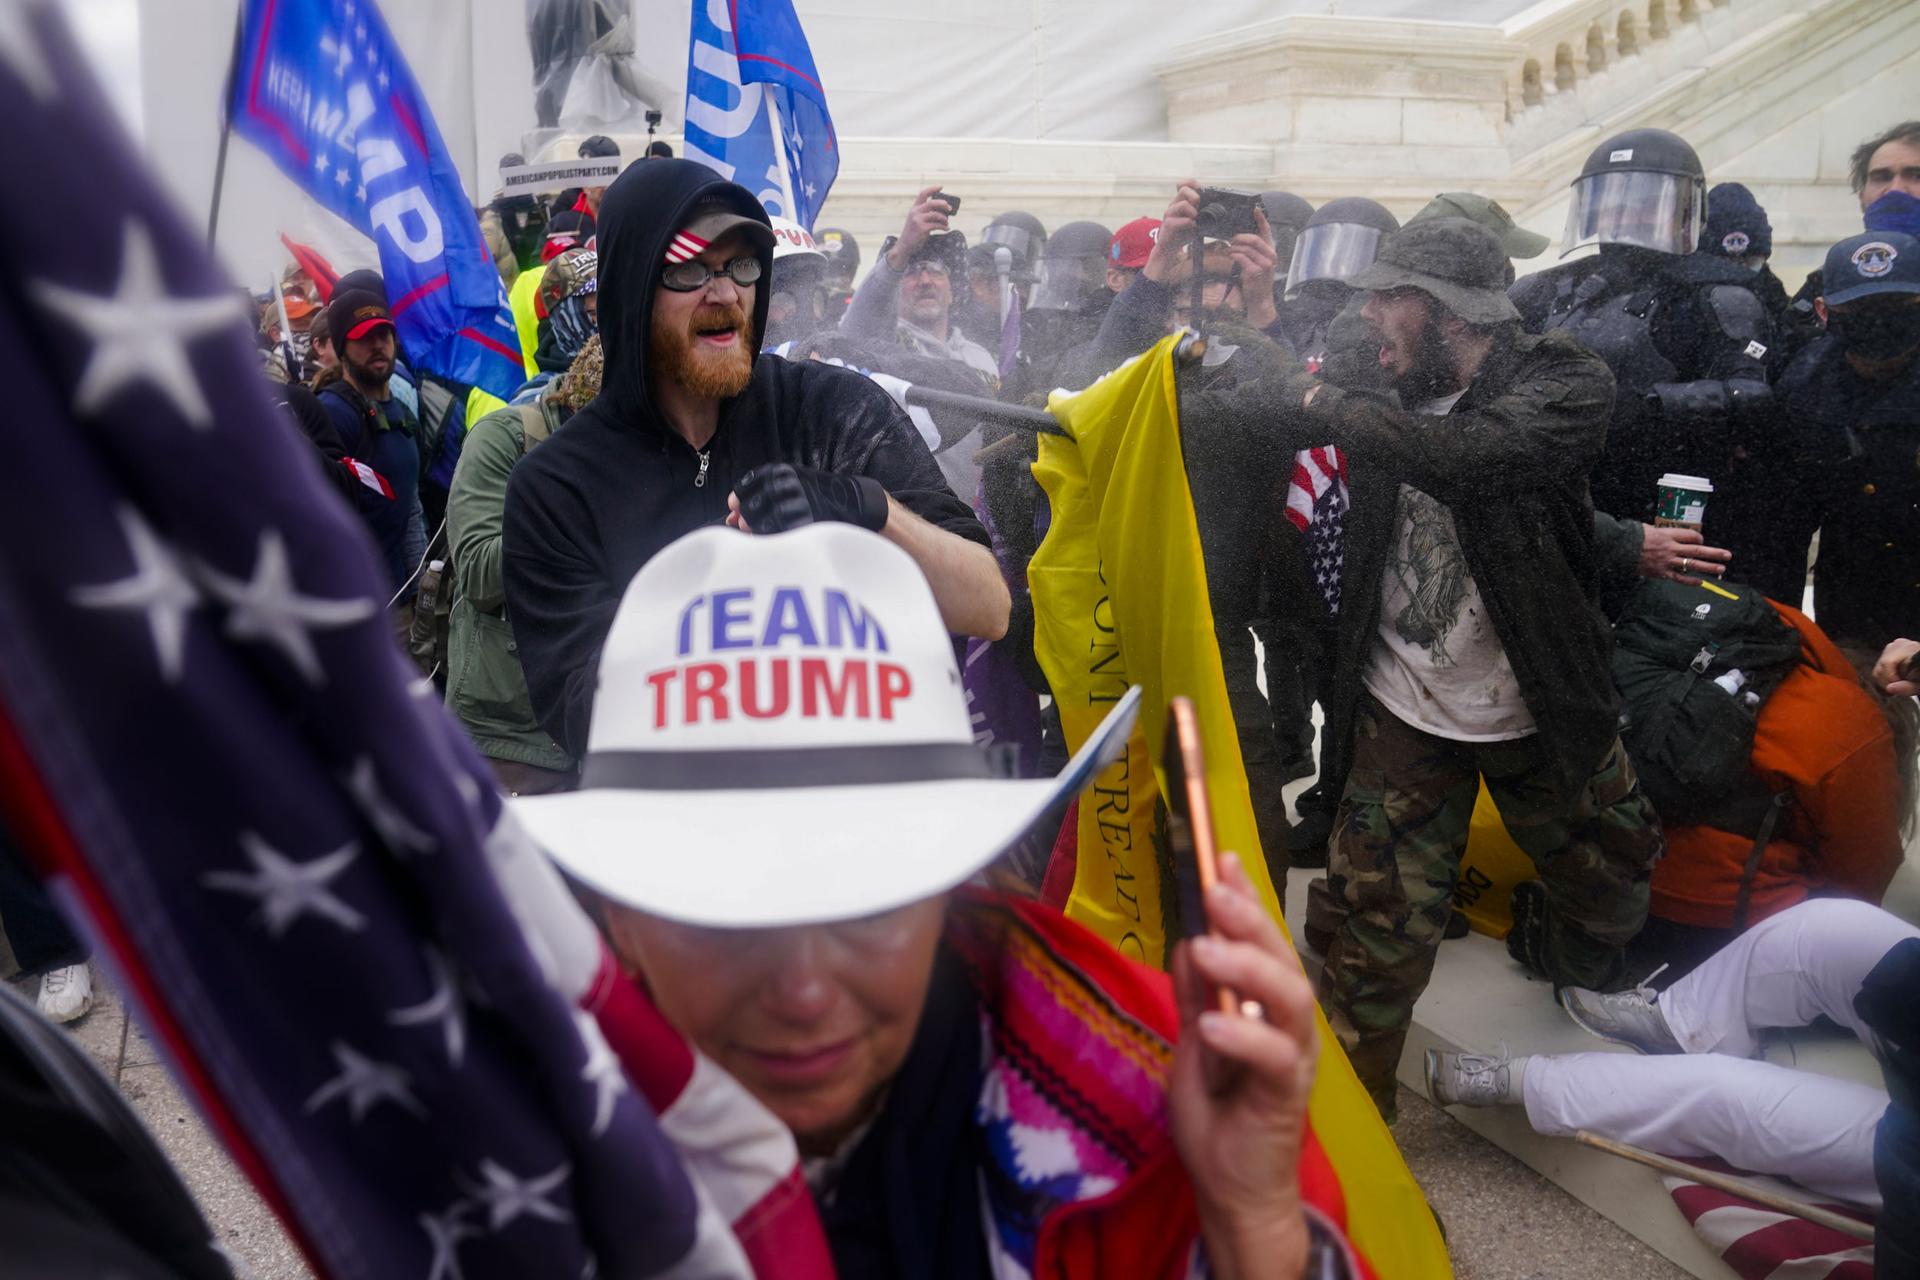 Several people wearing pro-Trump paraphernalia are shown outside of the US Capitol building with police wearing helmet and face guards shown opposite.